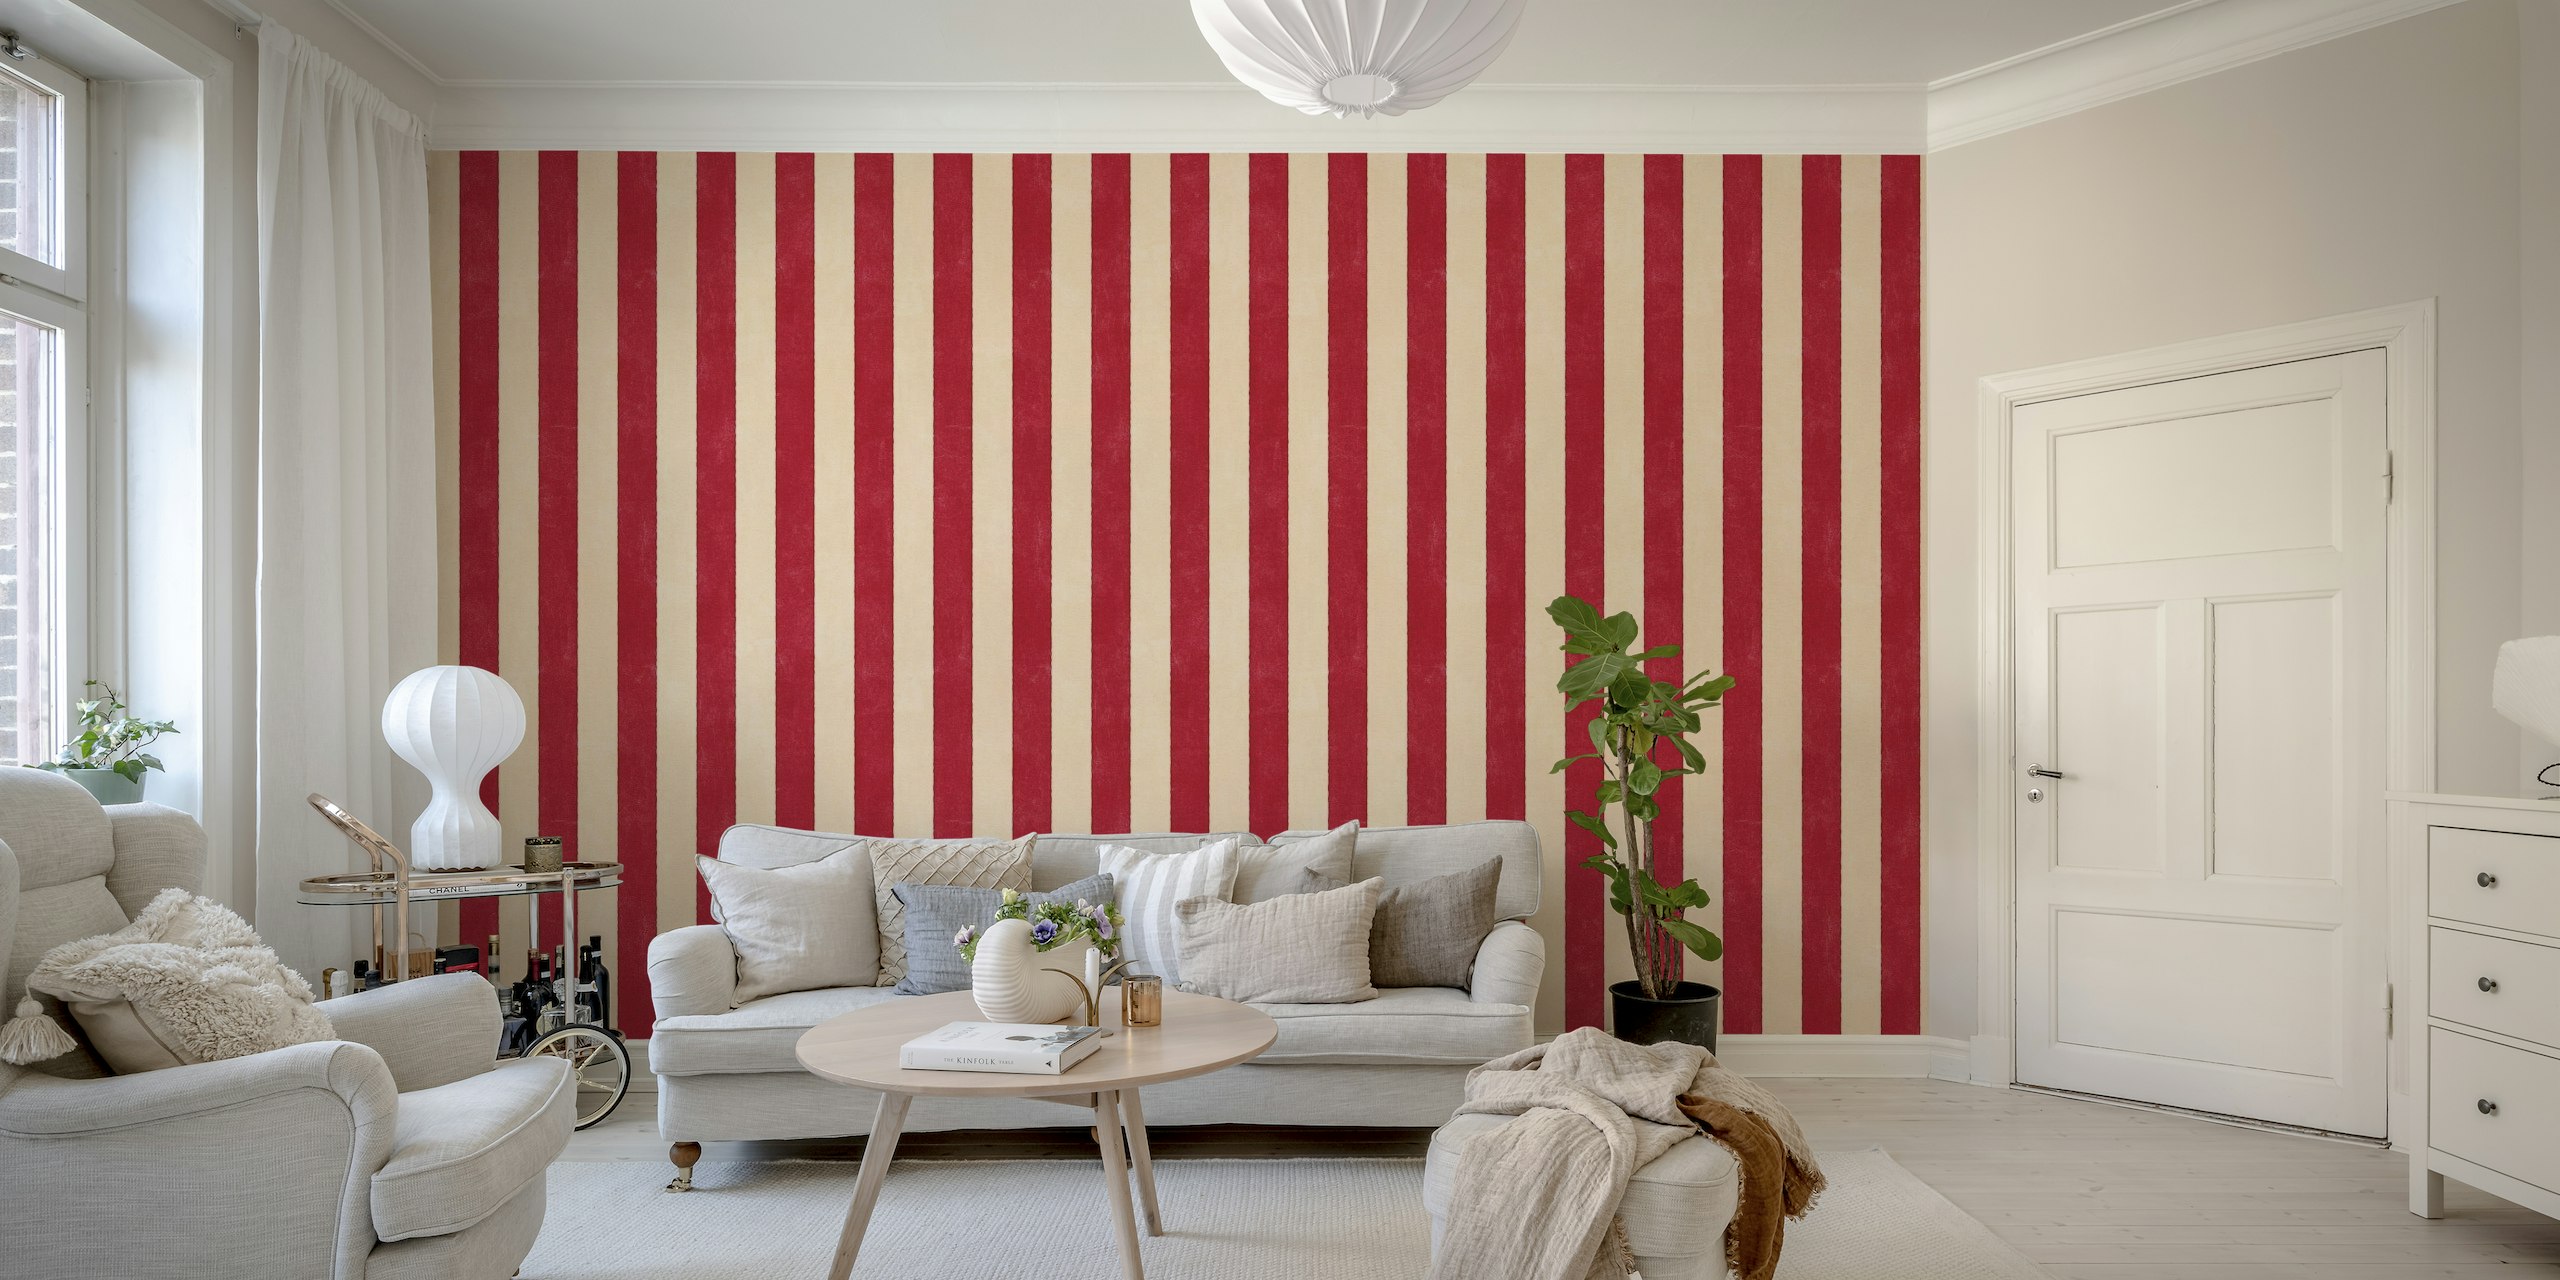 Red and off-white vertical striped wall mural